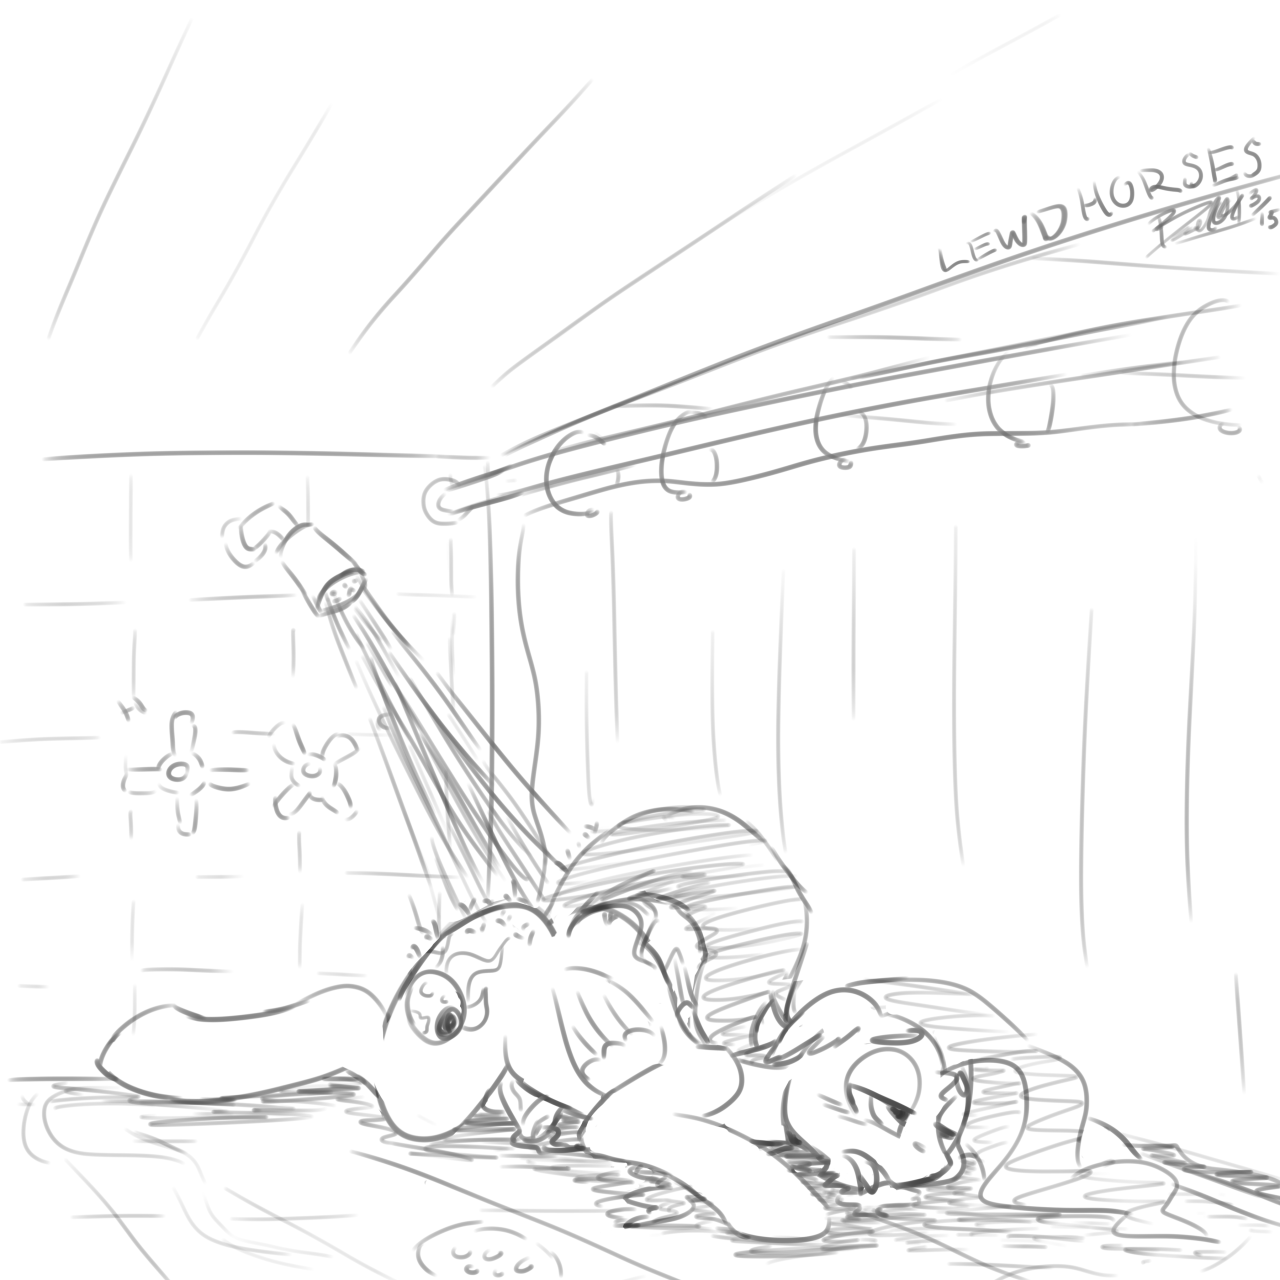 lewdhorses:TMI drawing post. Sometimes in the shower I like to just lie there, face